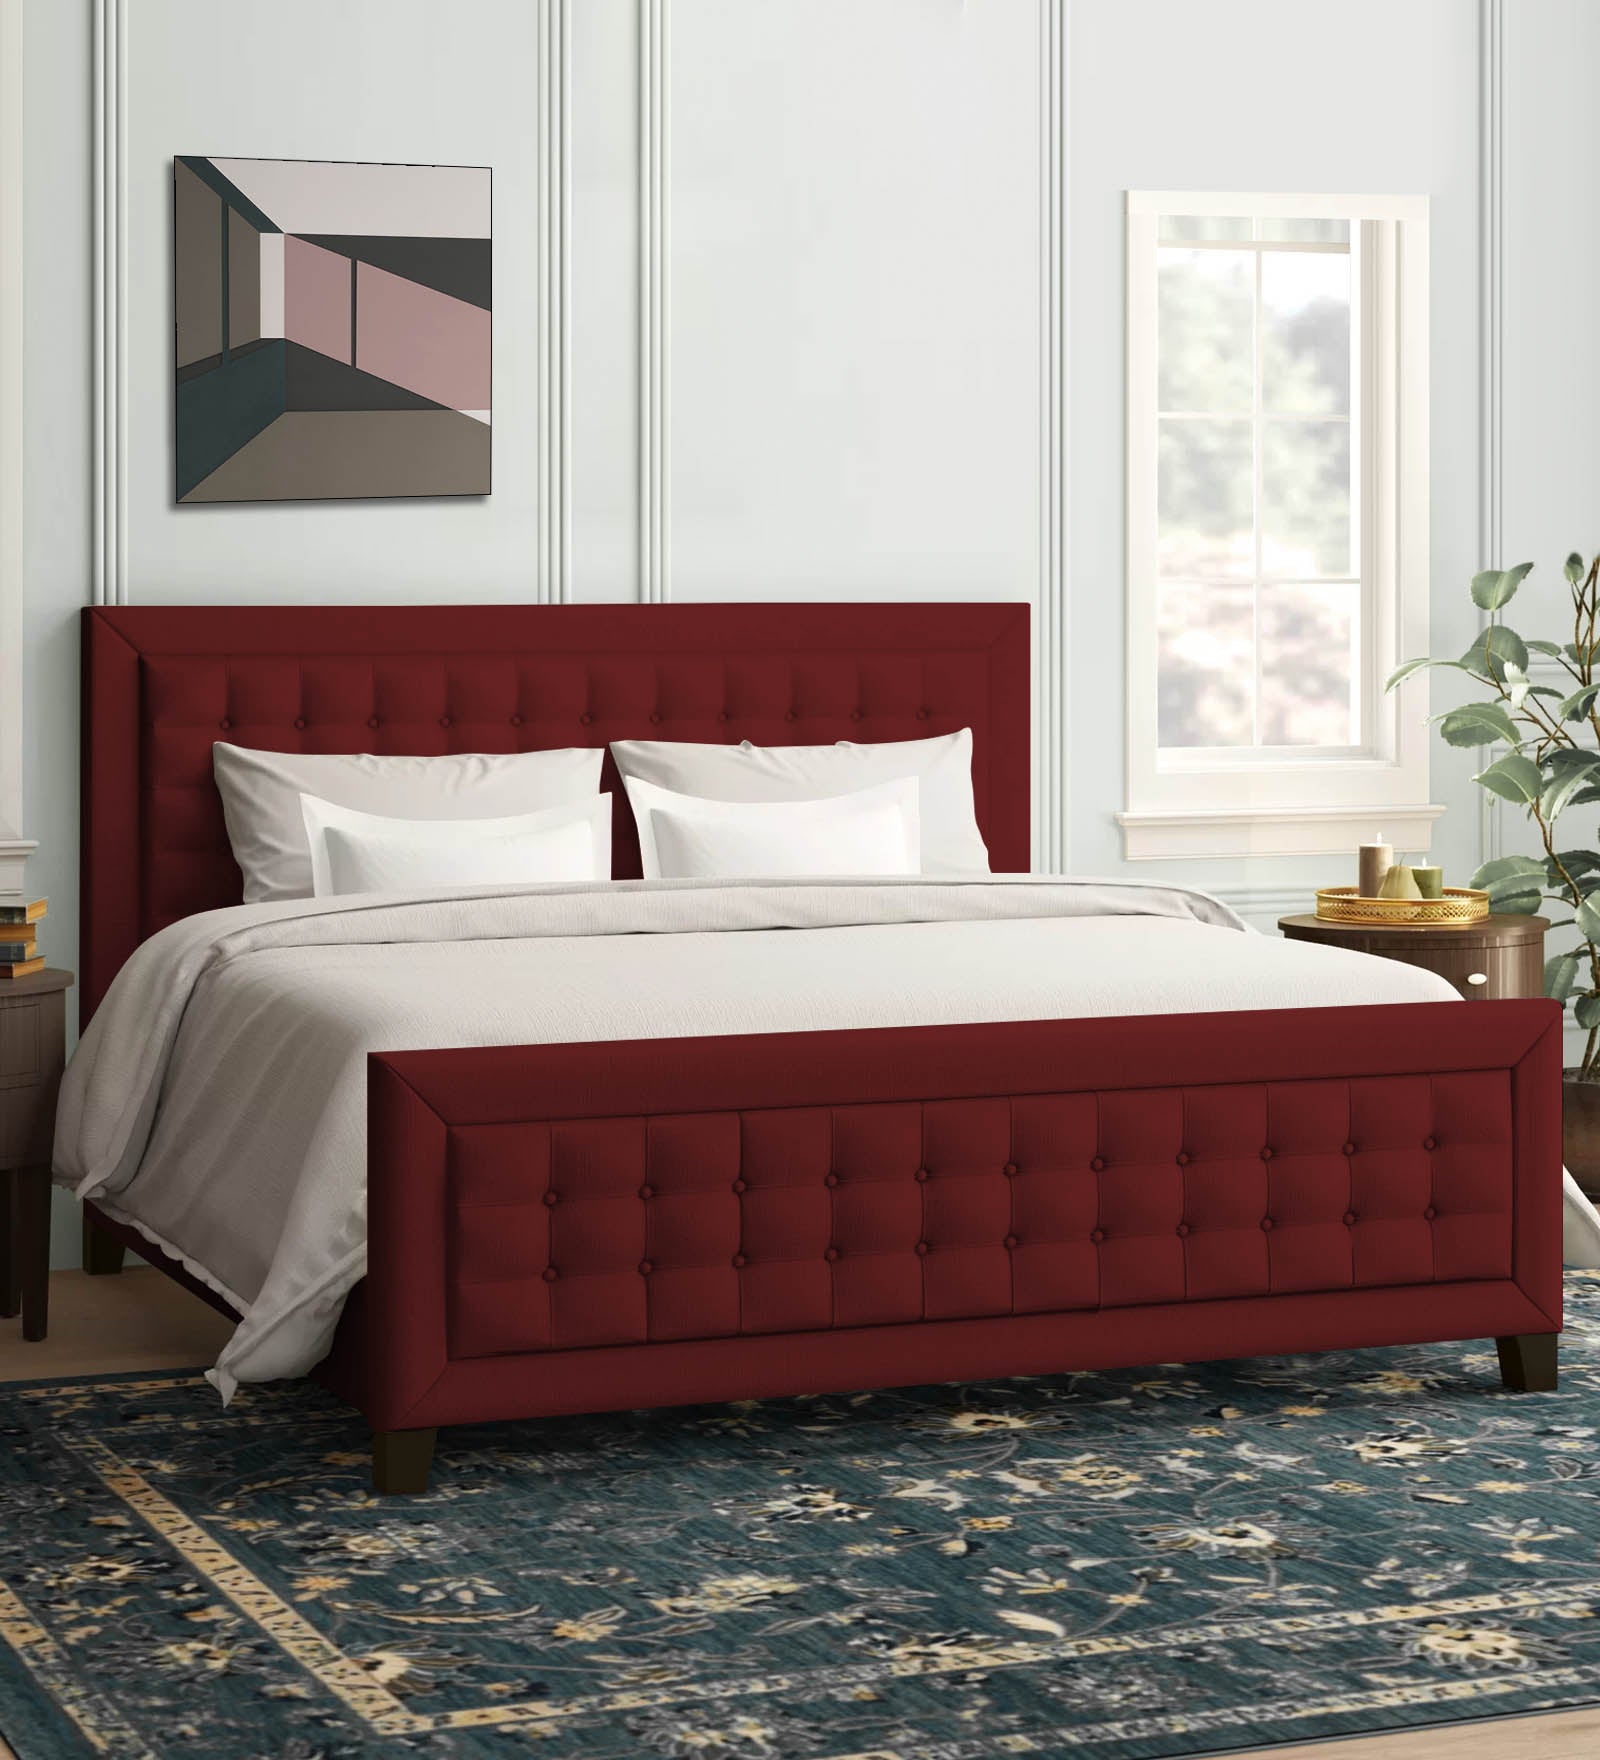 Kaster Fabric King Size Bed In Blood Maroon Colour